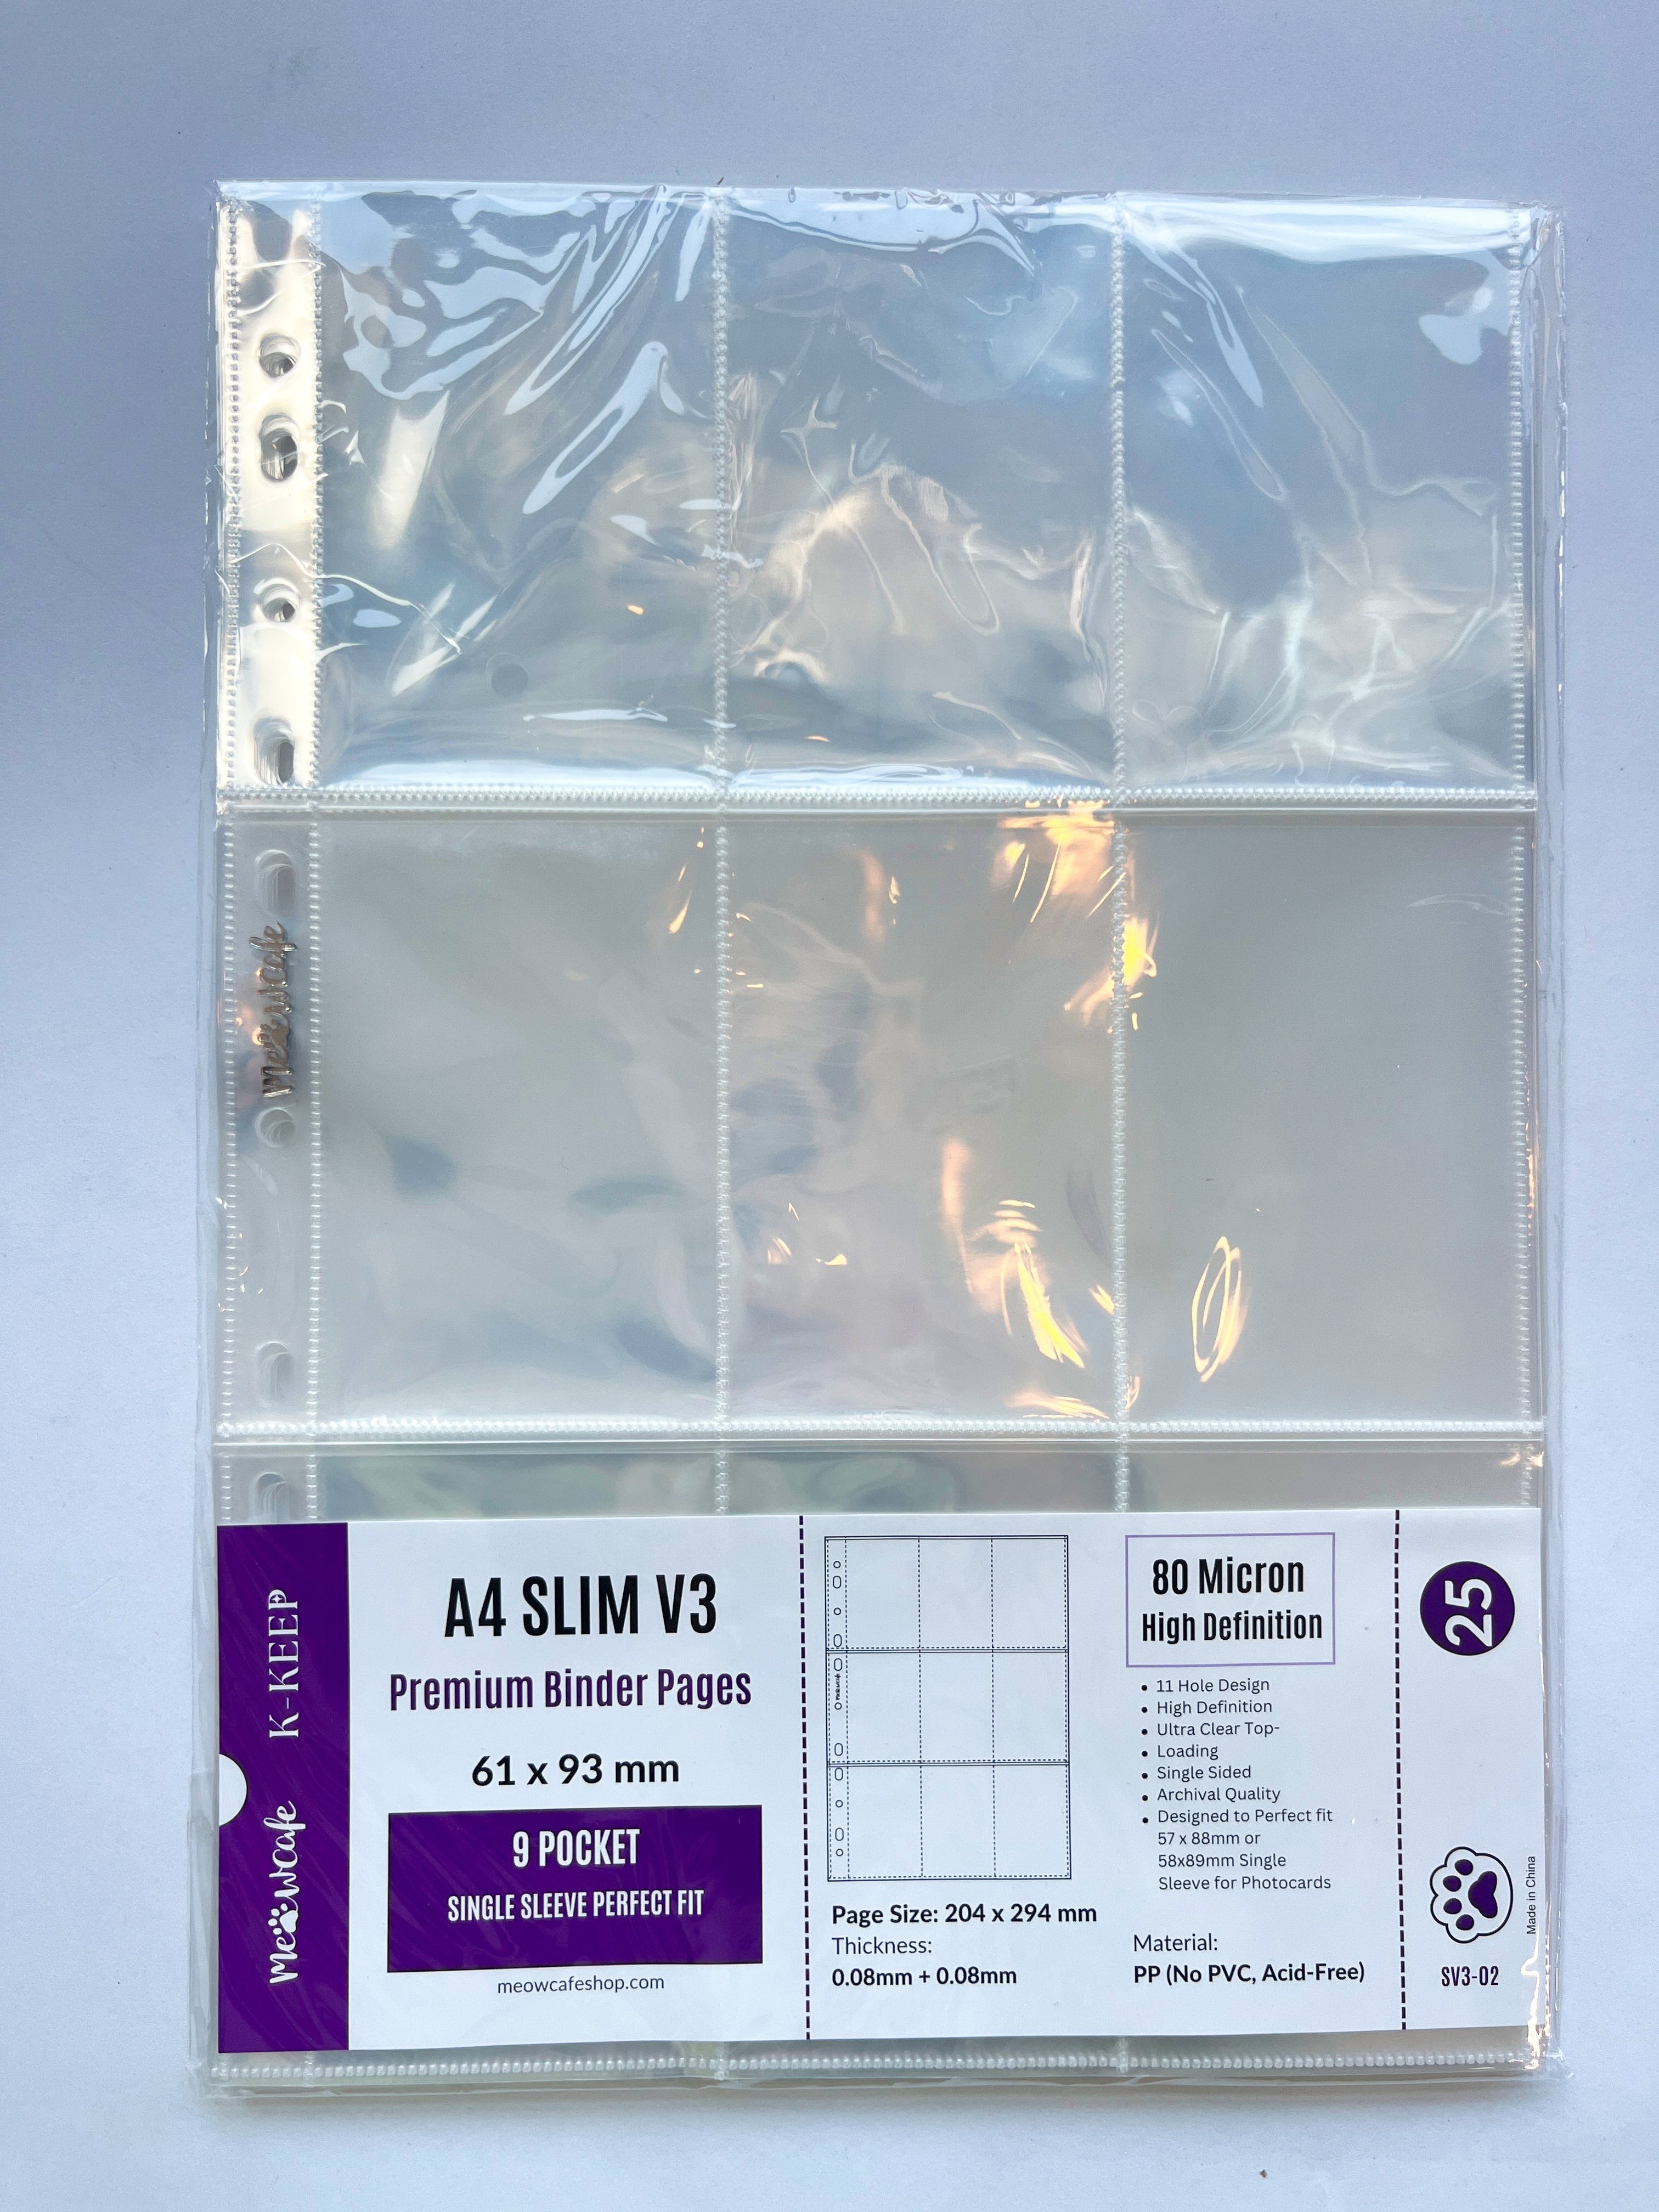 K-KEEP [A4 SLIM V3] - 9 Pocket (63x93mm) (For Perfect Fit 61x91mm